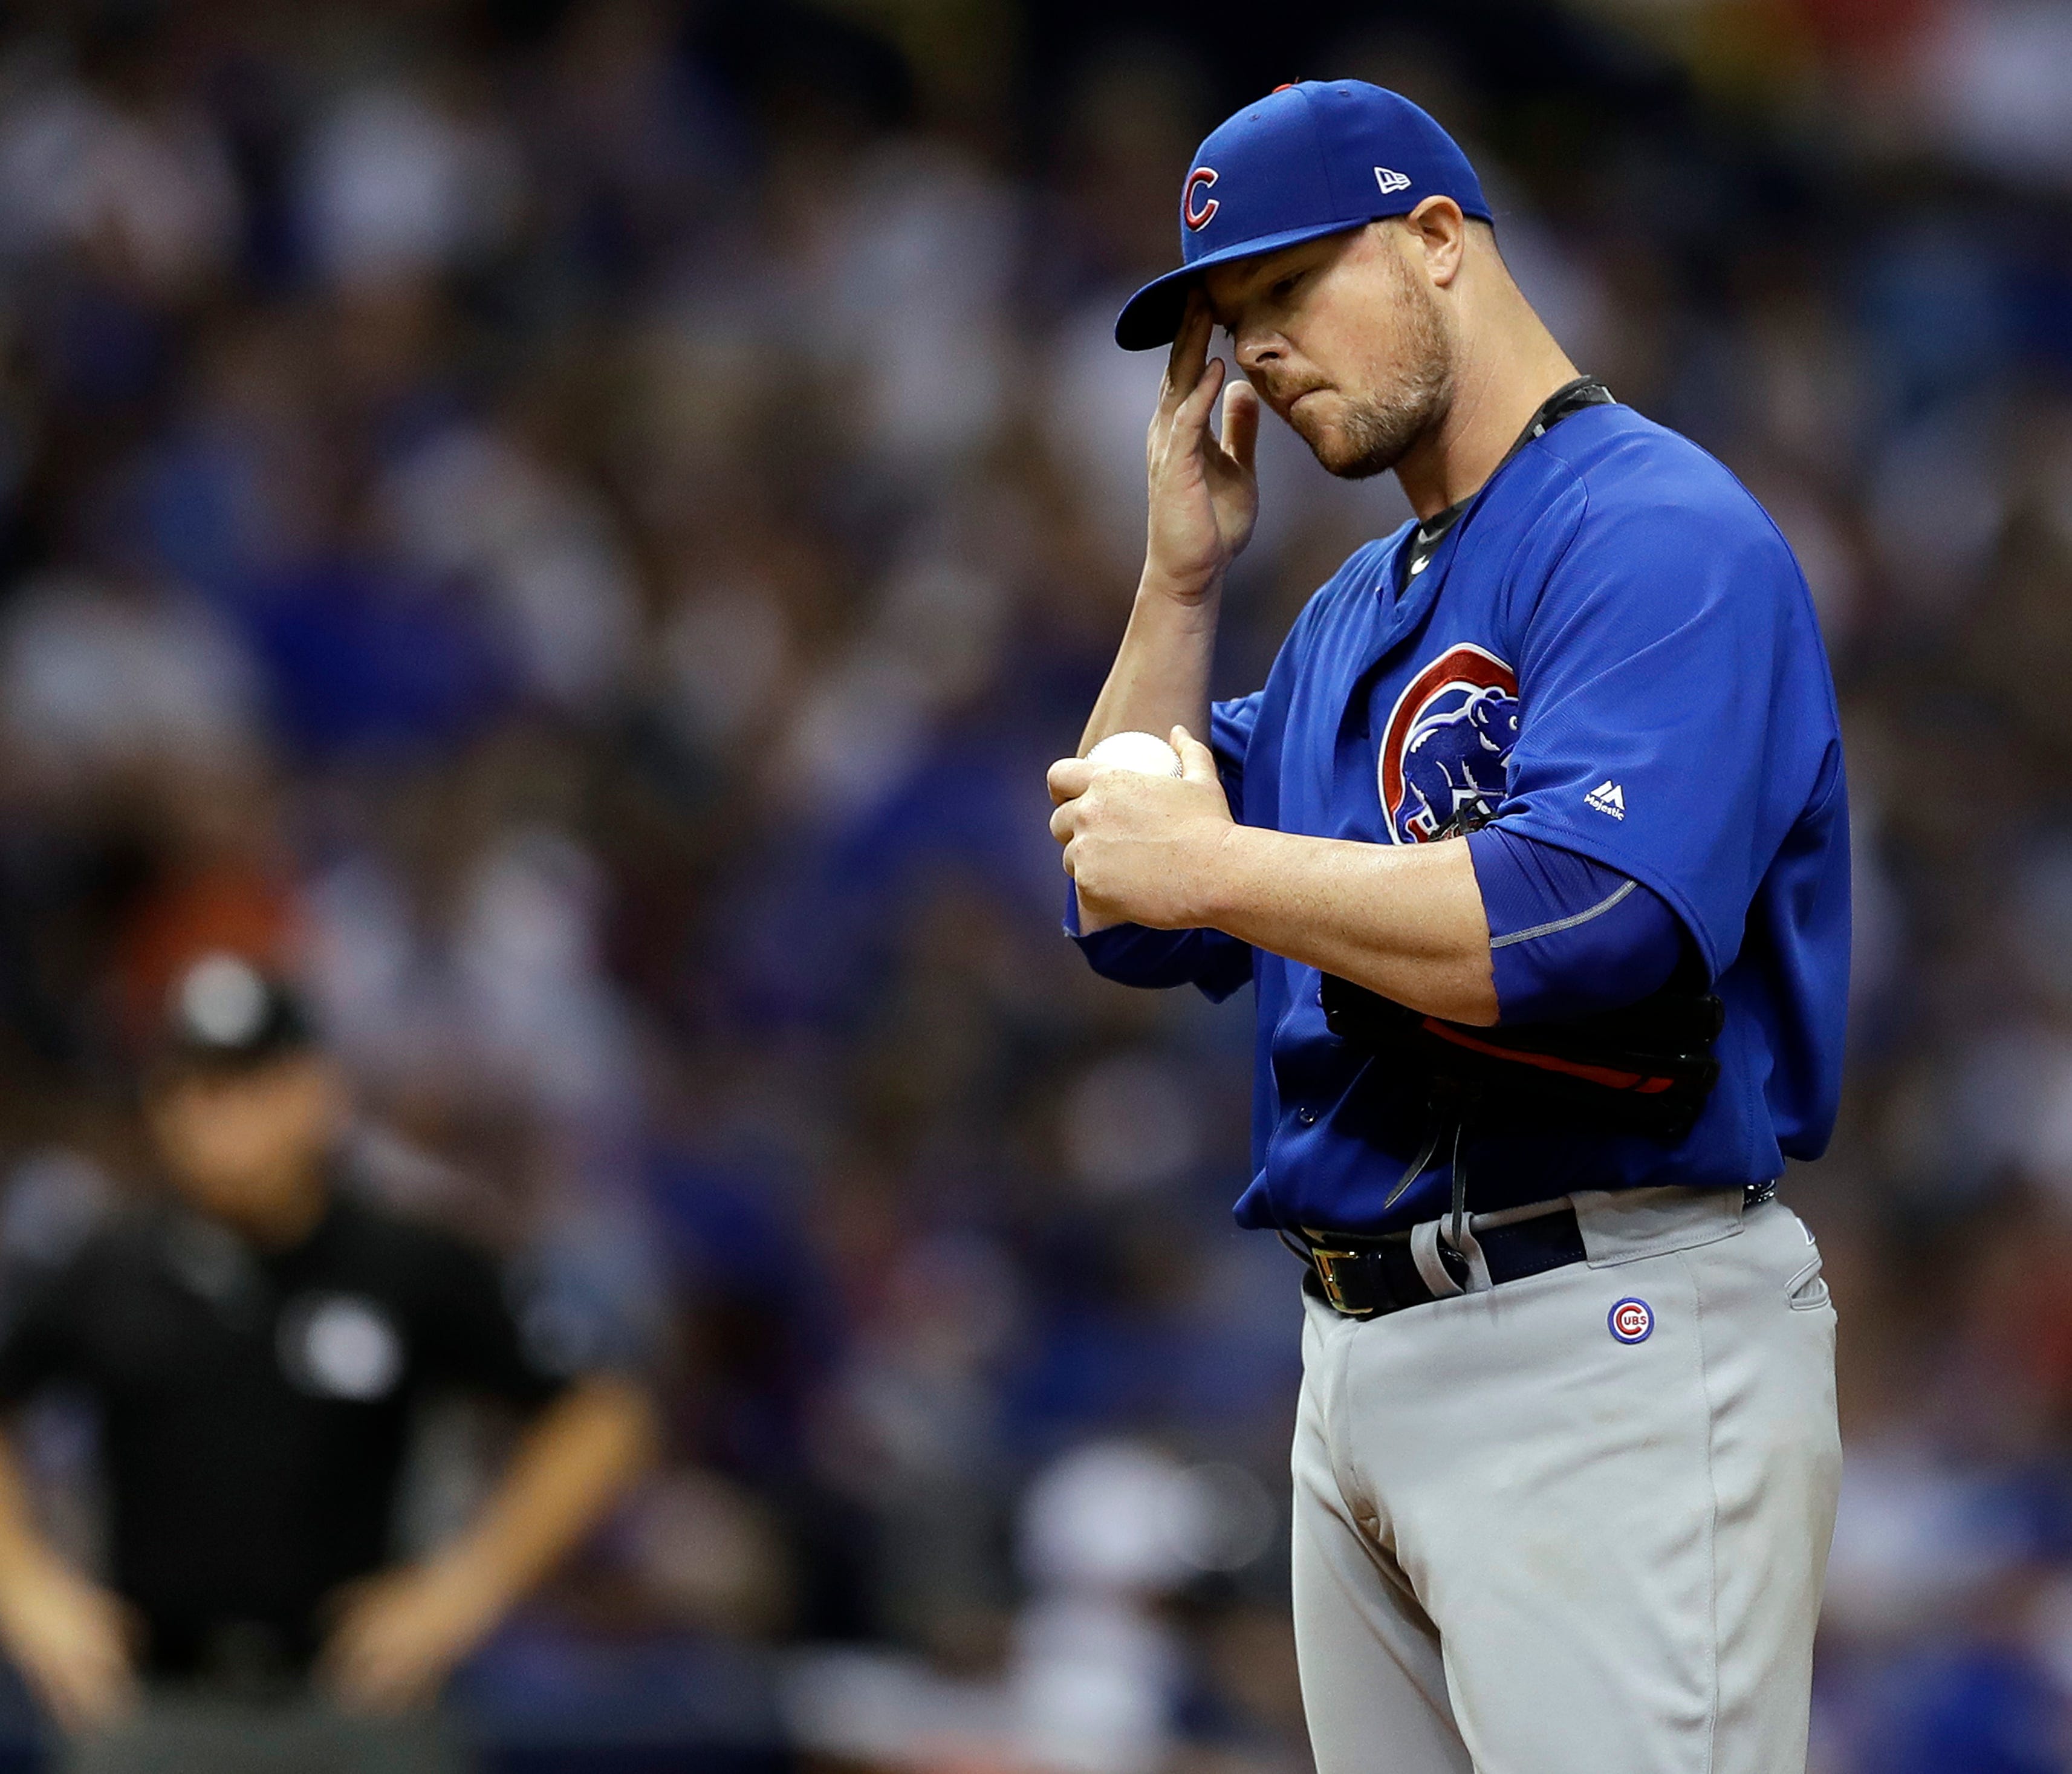 Chicago Cubs starting pitcher Jon Lester wipes his forehead as he struggles against the Tampa Bay Rays during the fifth inning of a baseball game Wednesday, Sept. 20, 2017, in St. Petersburg, Fla. Lester was removed later in the inning. (AP Photo/Chr